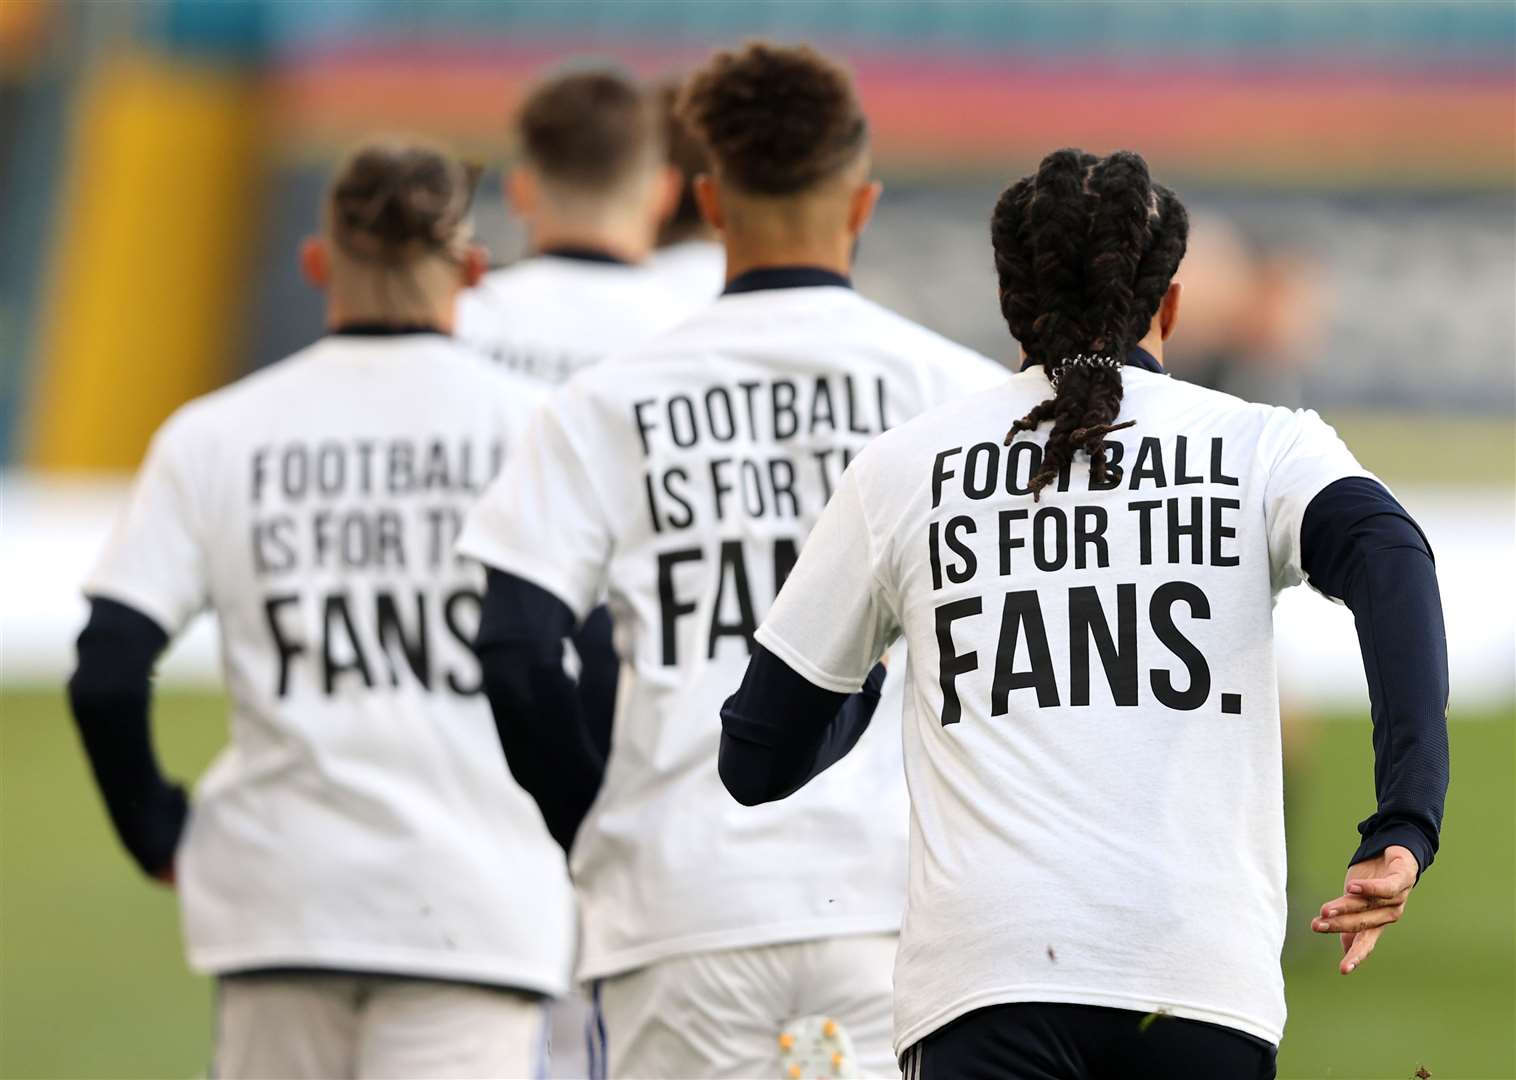 Leeds players wearing ‘Football Is For The Fans’ shirts during the warm up for their Premier League match with Liverpool (Clive Brunskill/PA)